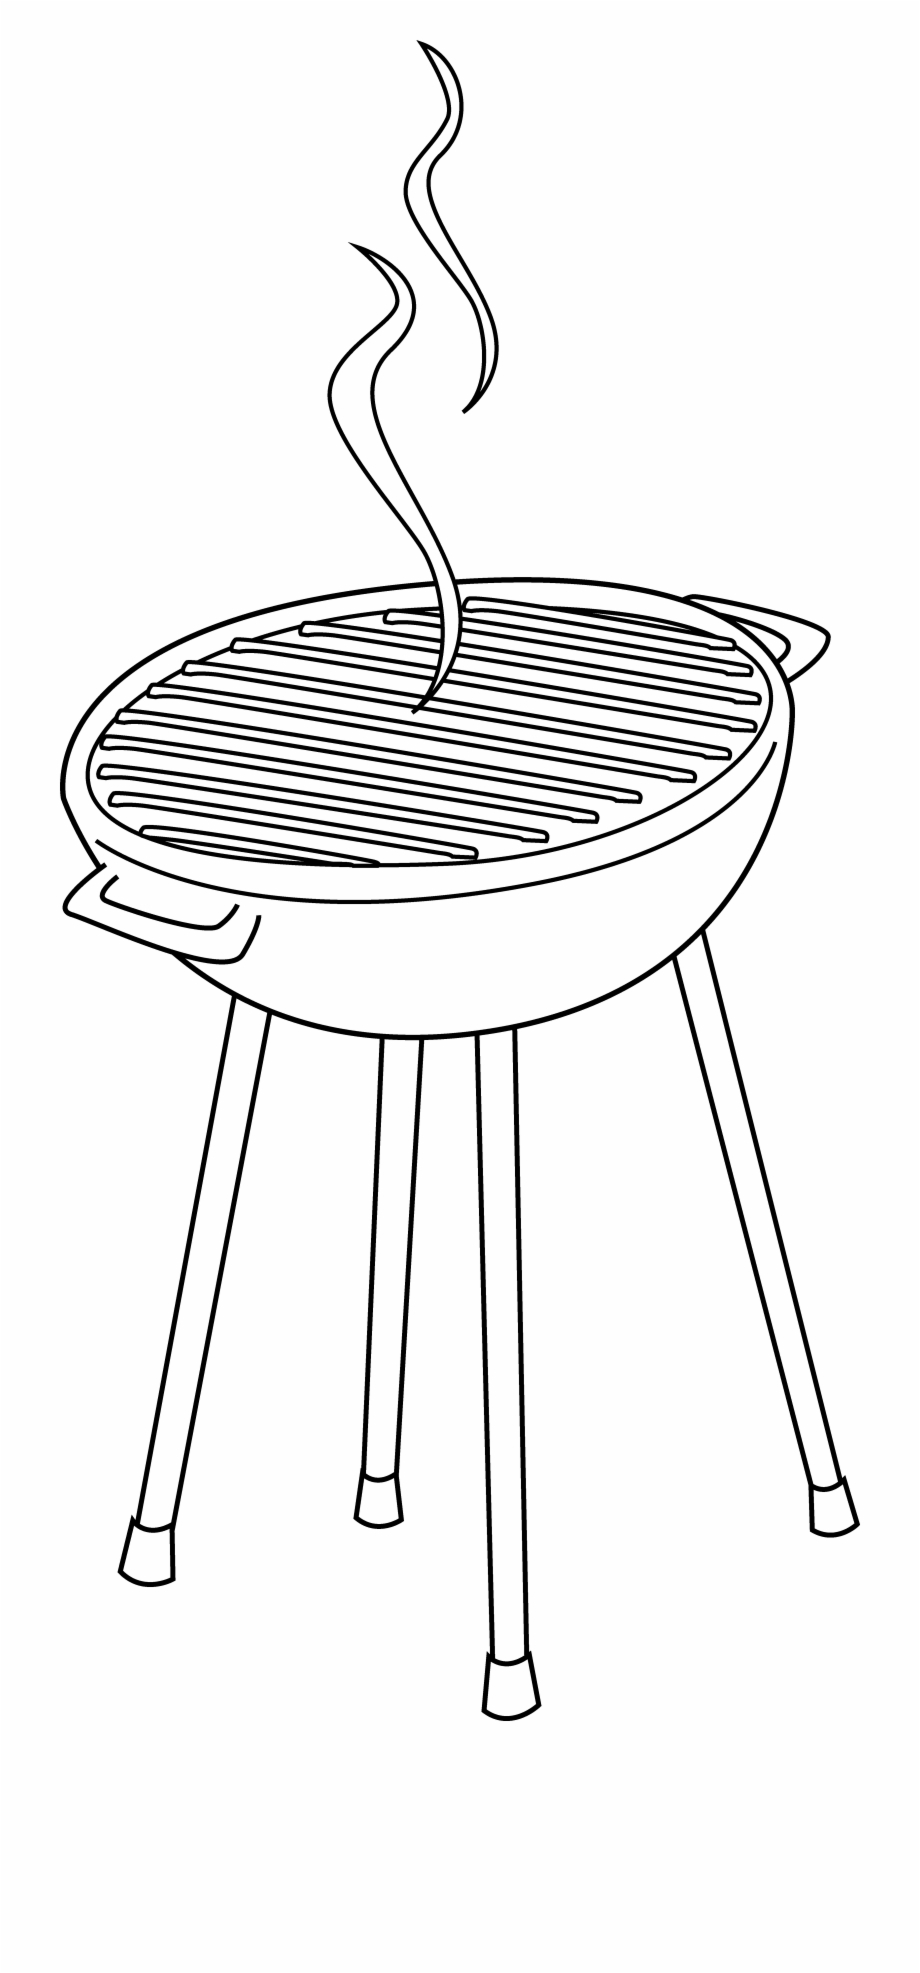 Barbeque Grill Line Art Grill Clipart Black And